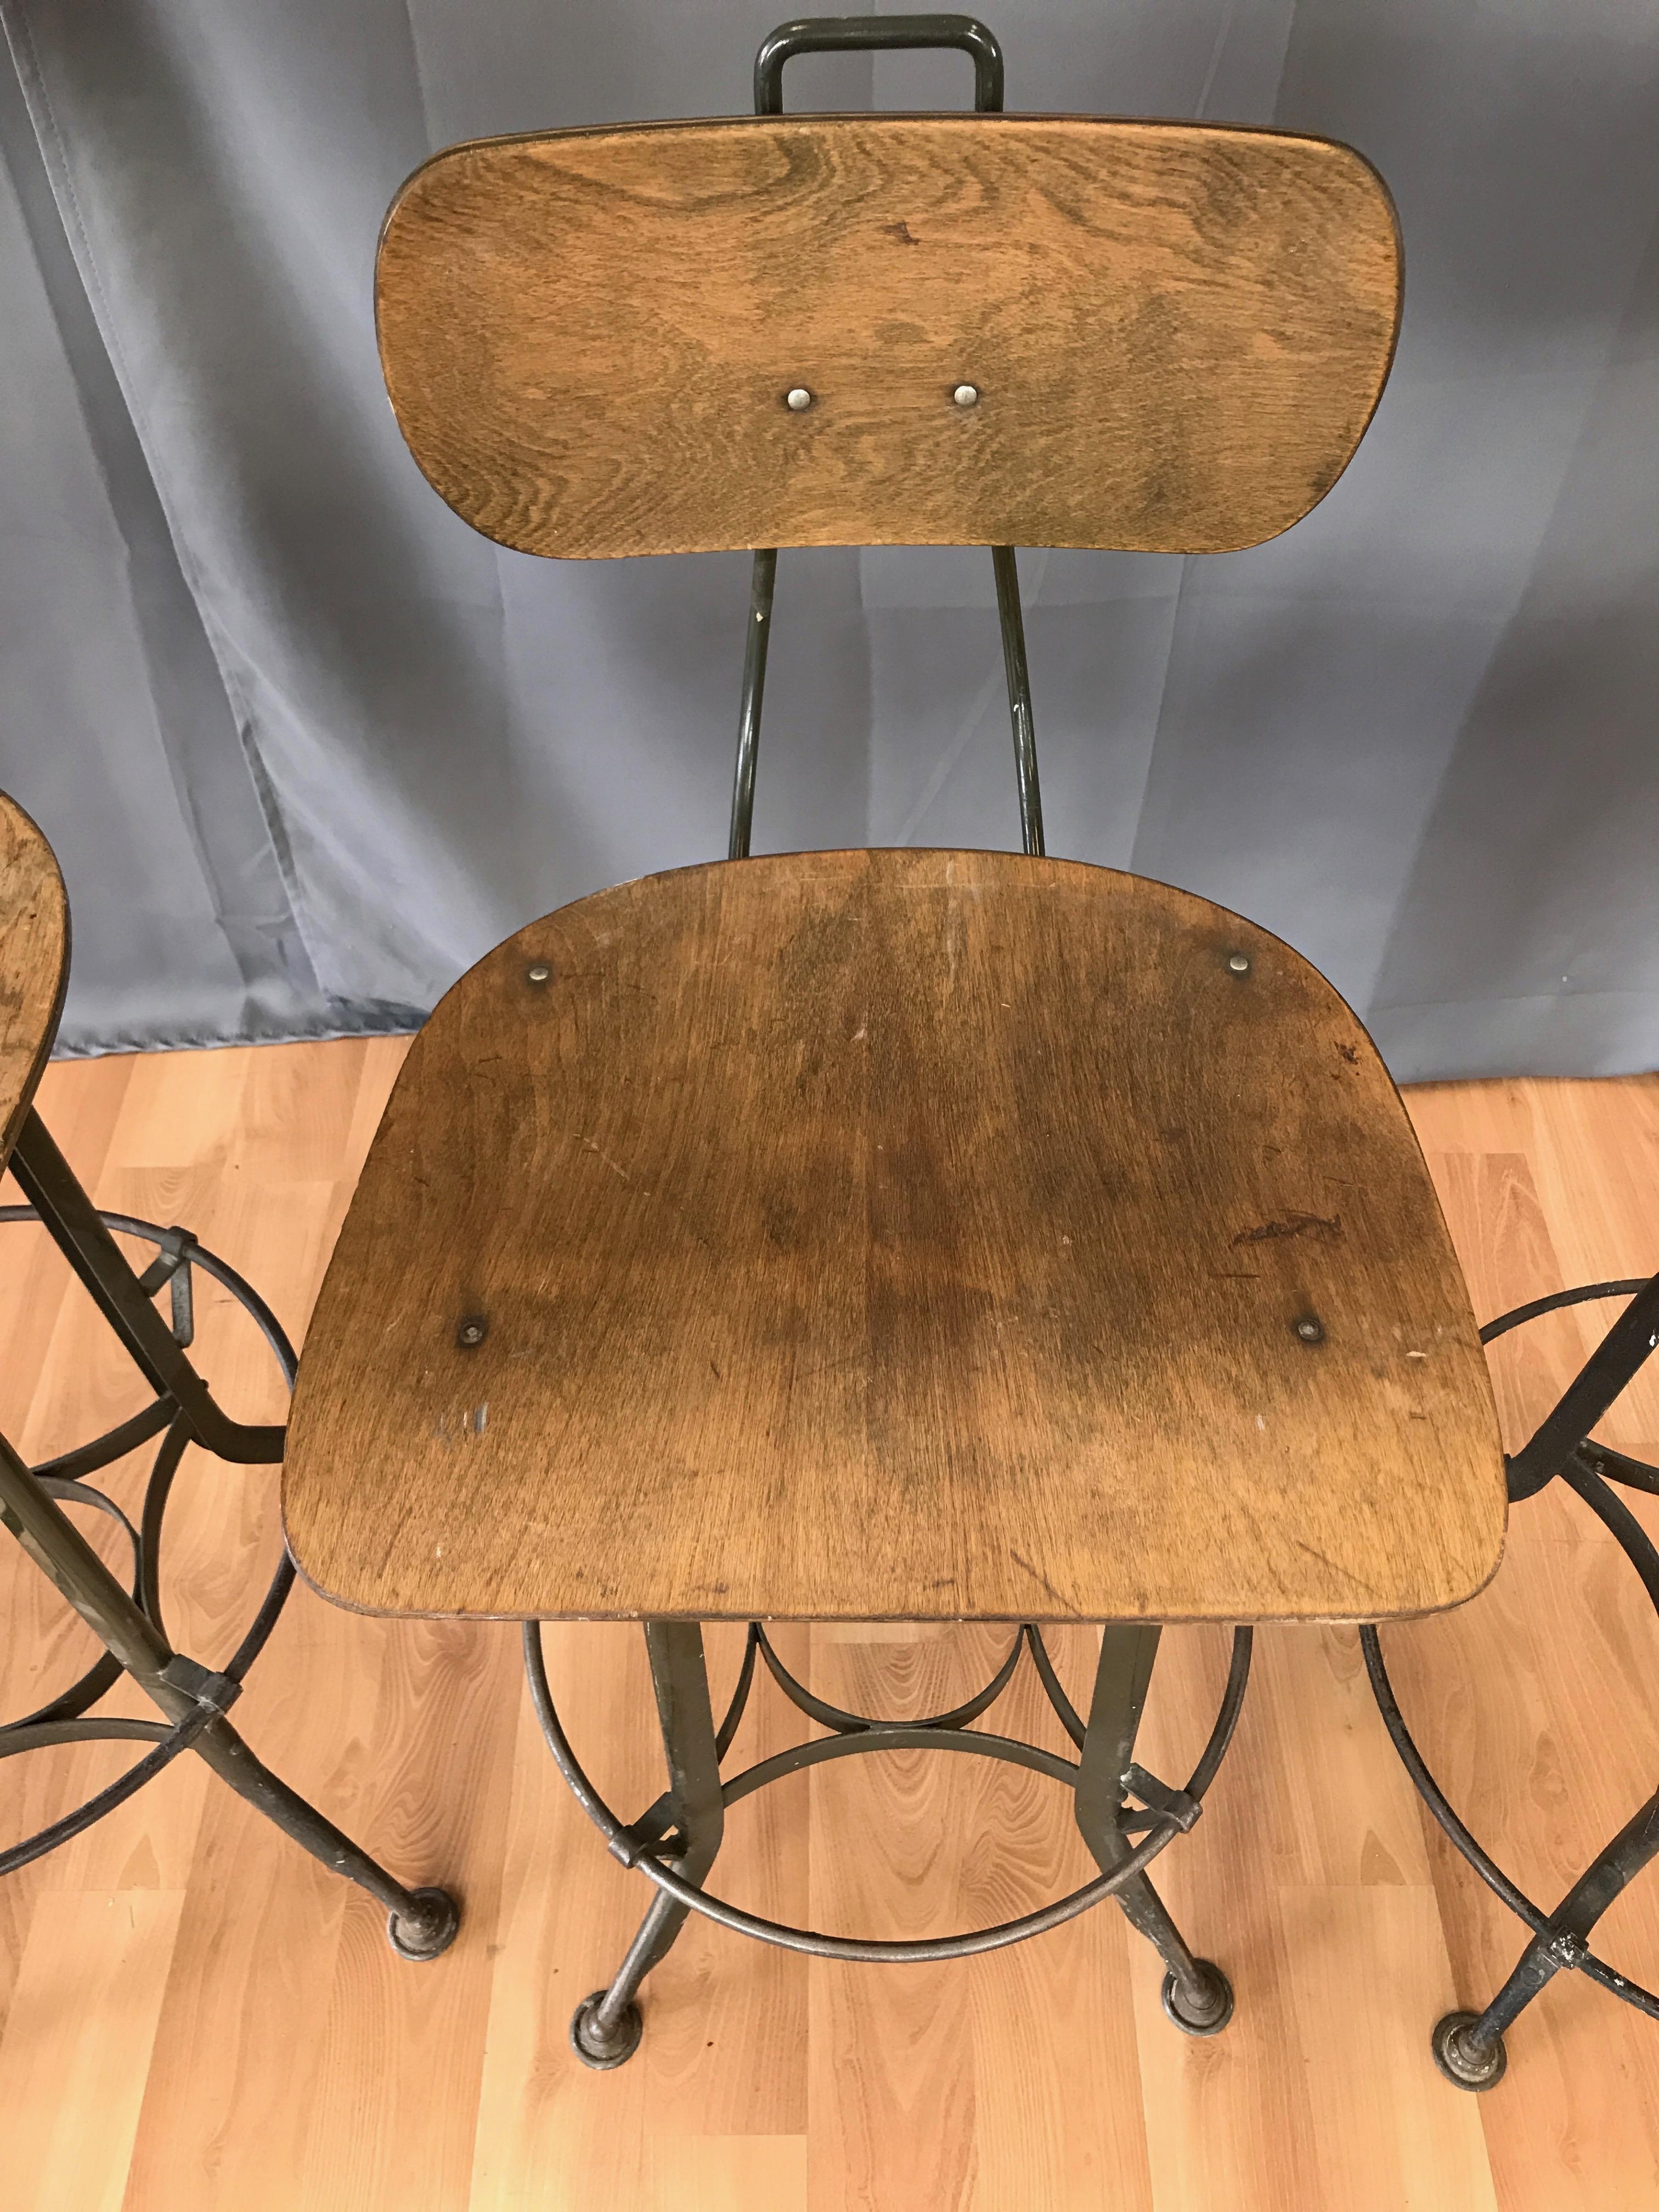 Toledo Industrial Adjustable Height Swivel Stools with Backs, Two Available 2